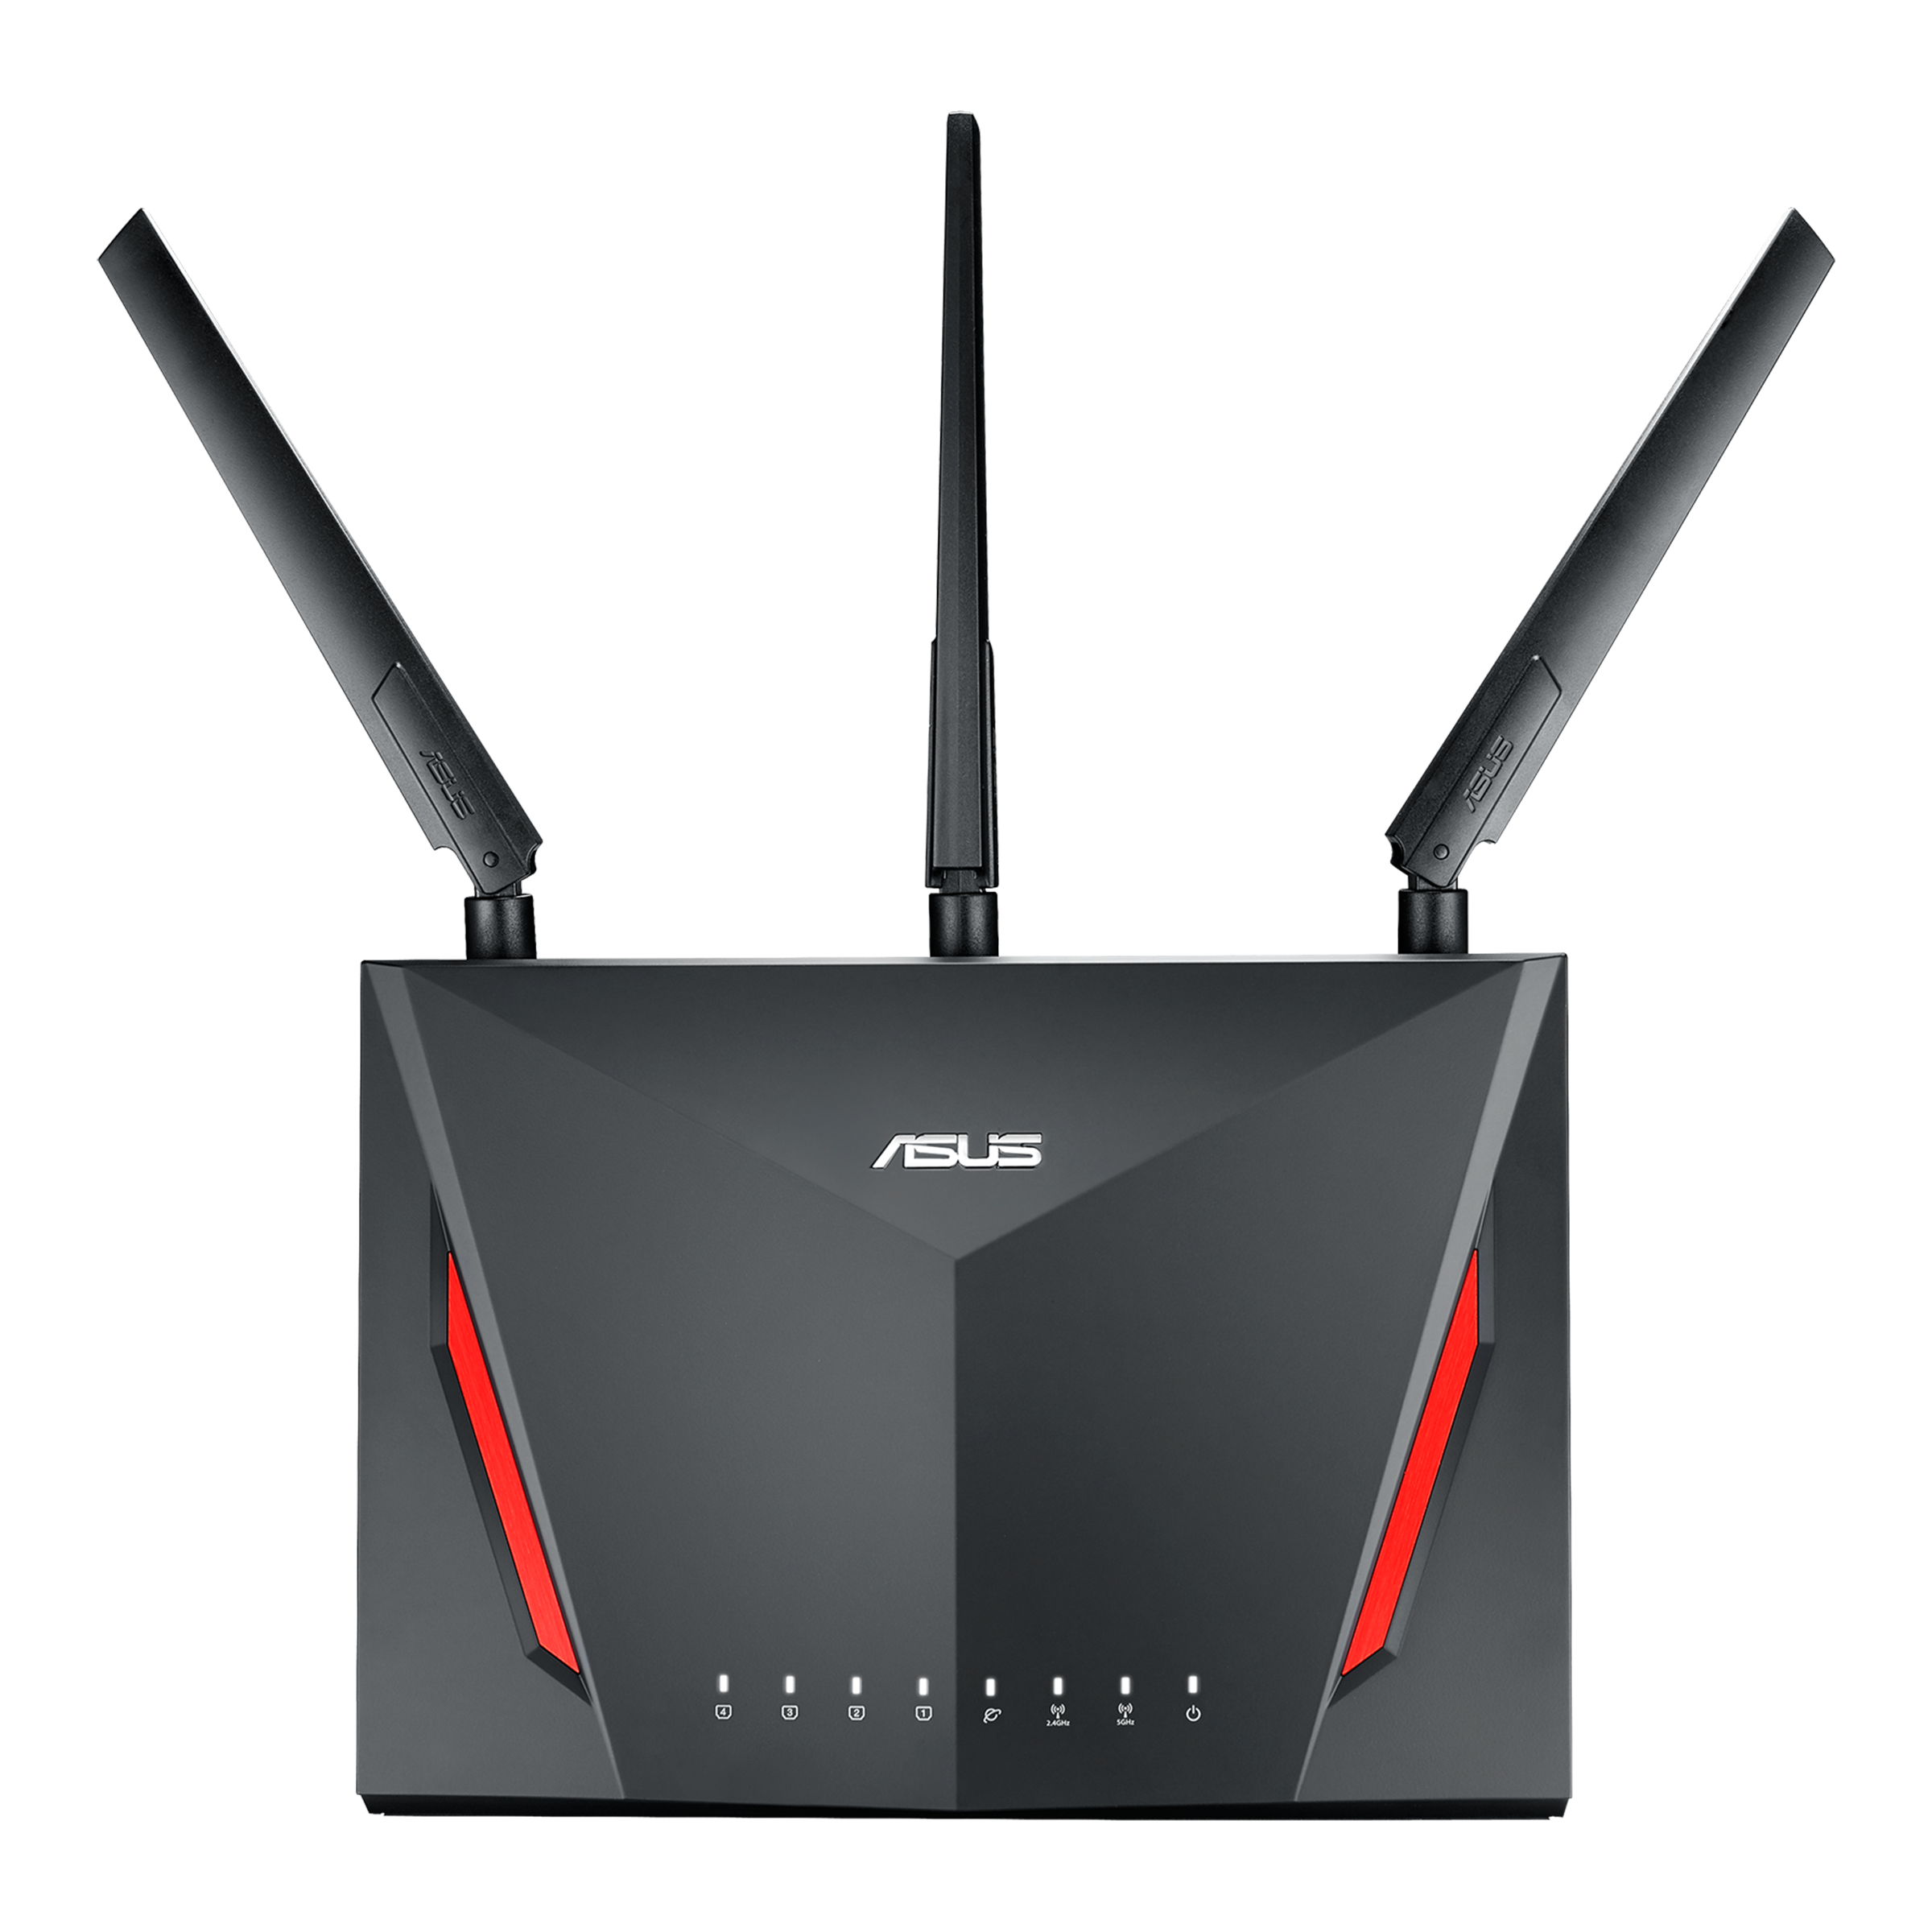 ASUS AC2900 Dual-band Gaming Router, game acceleration, Mesh Wi-Fi support, Lifetime Free Internet Security, DFS, Gamer Private Network, Port Forwarding, Streaming & Gaming (RT-AC86U) - image 1 of 7